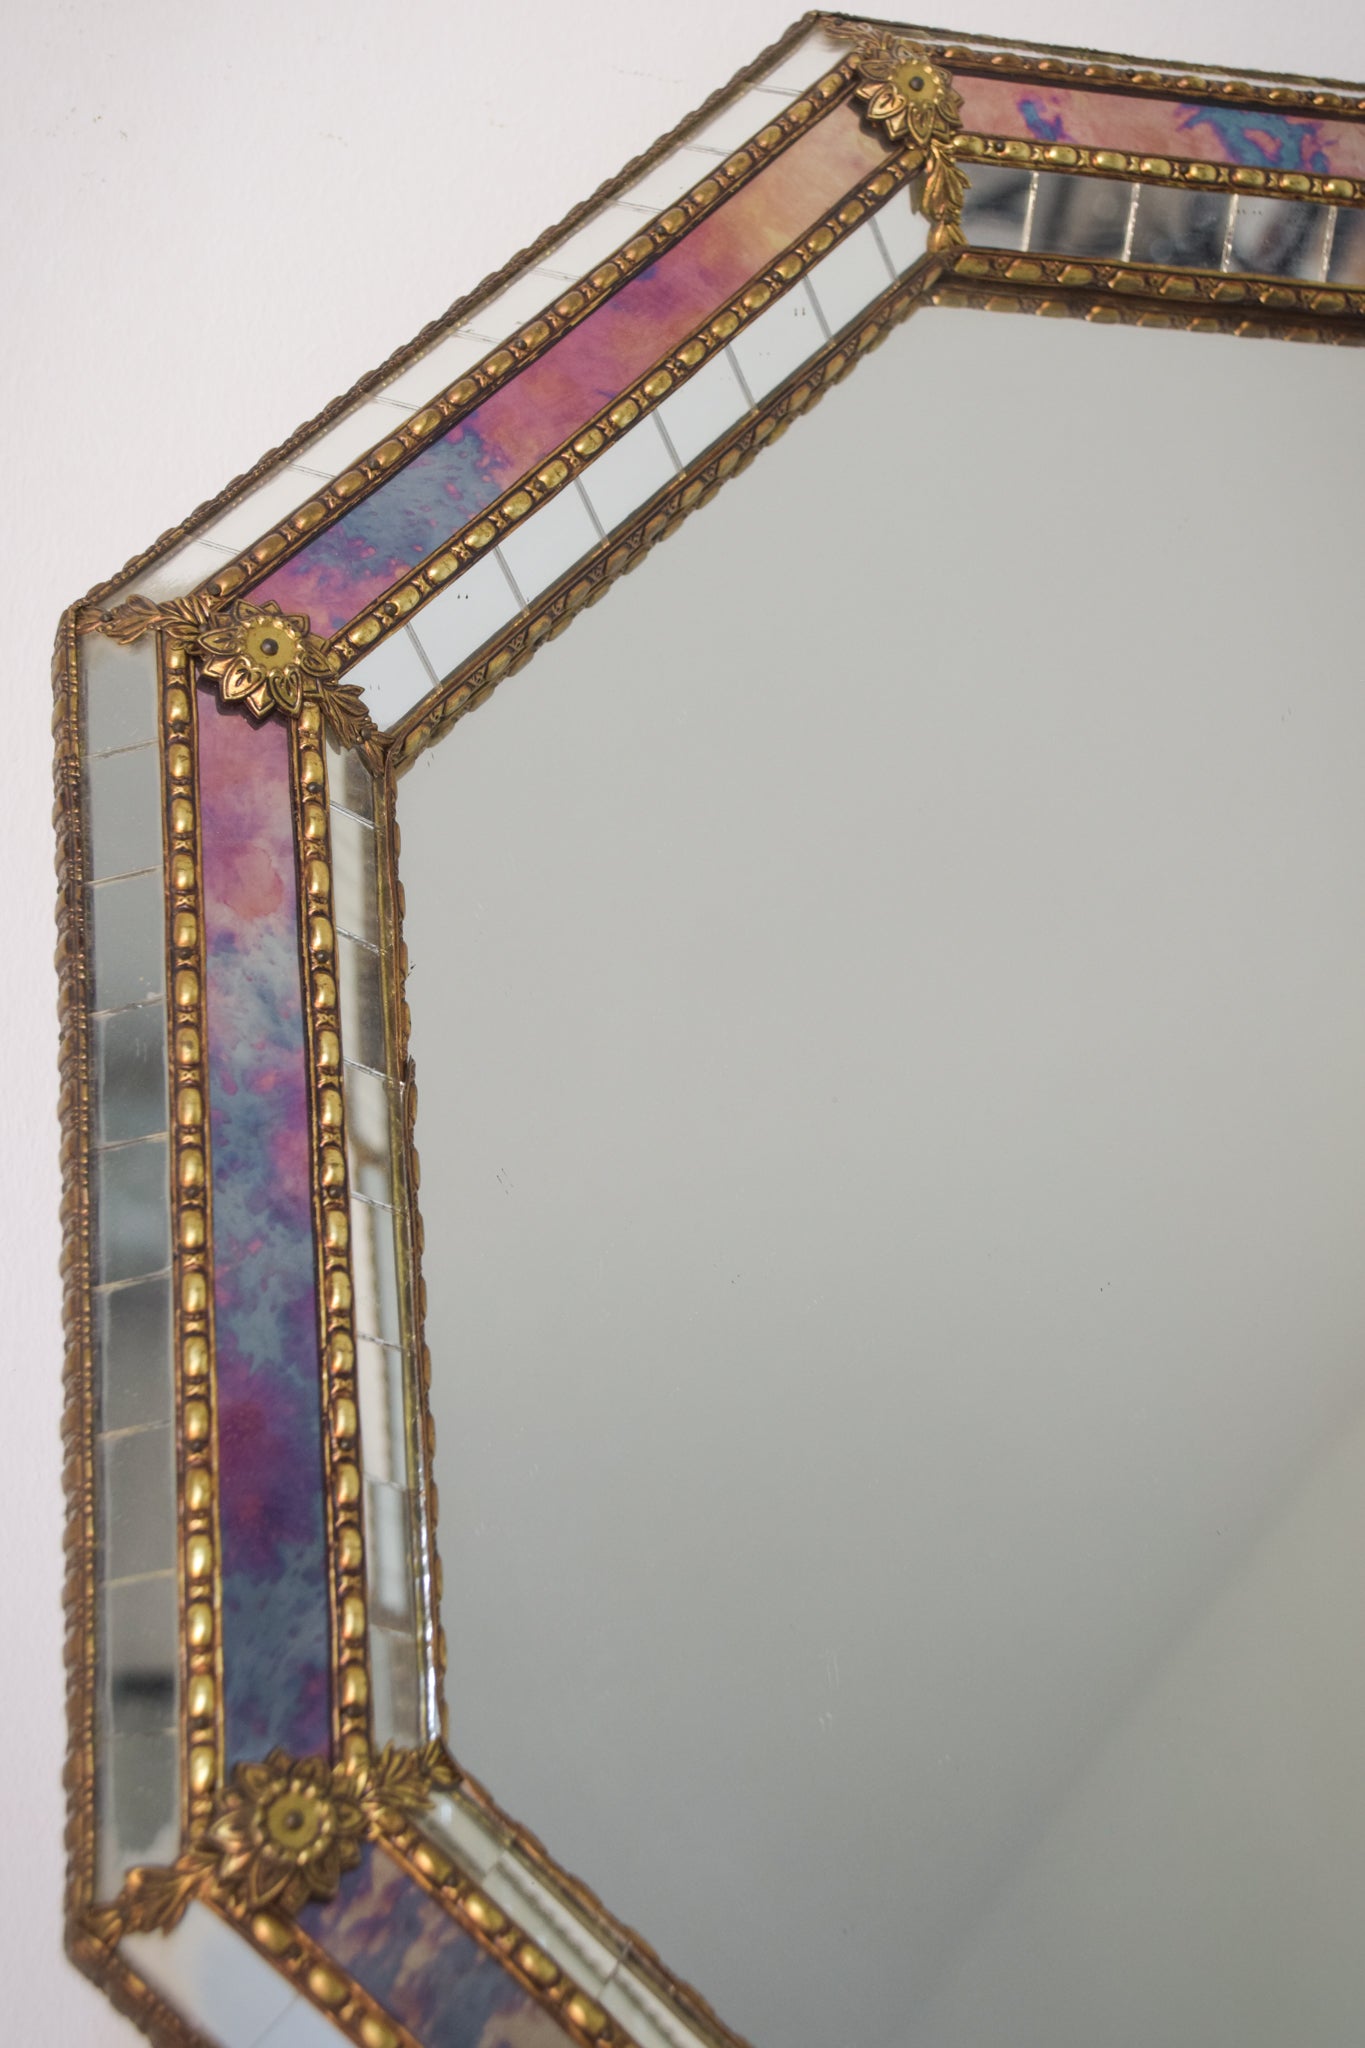 Octagonal Mirror with a Coloured Border and Carved Features